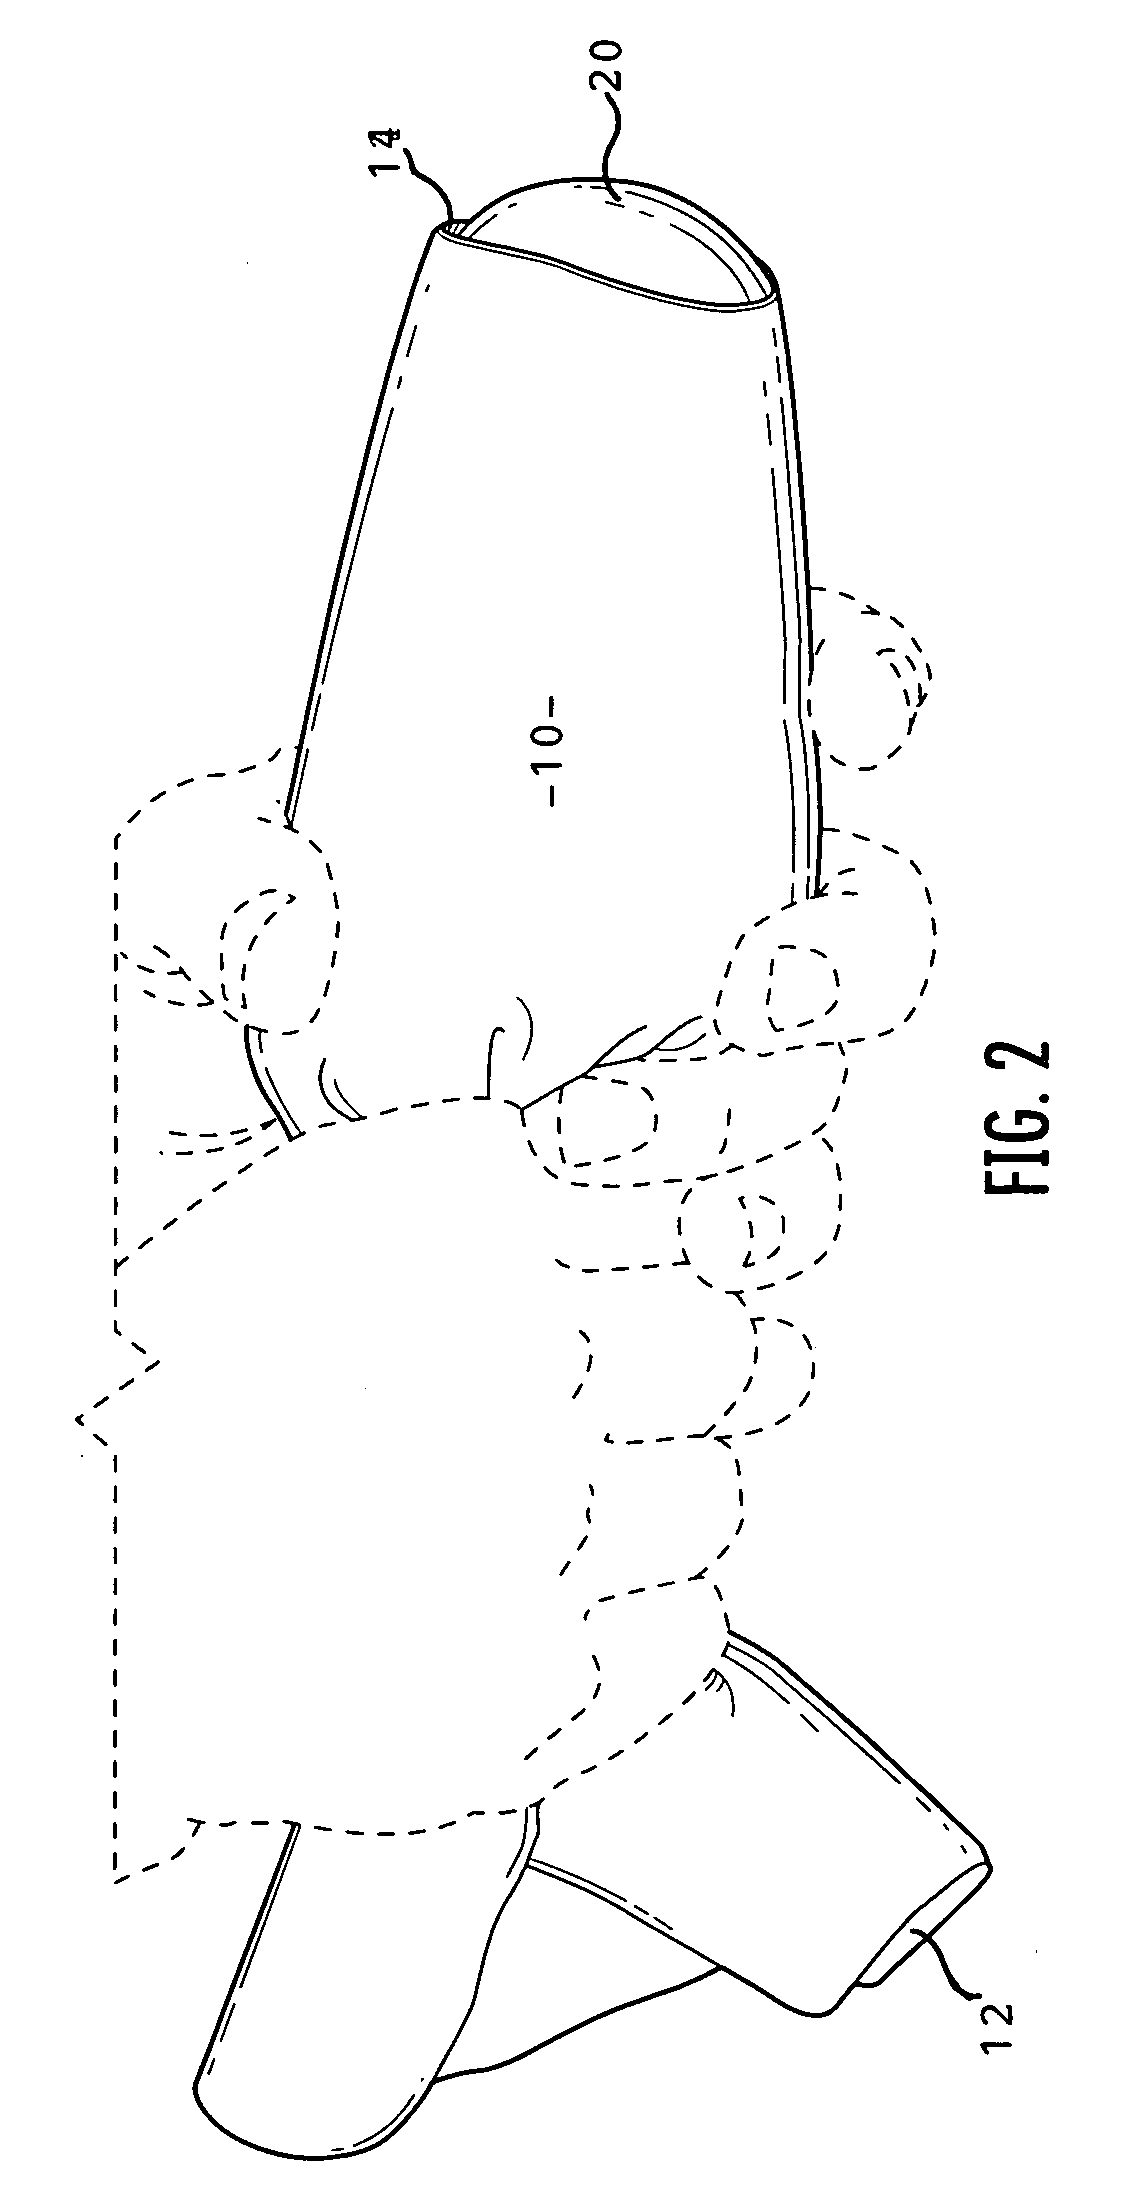 Apparatus and process for delivering a silicone prosthesis into a surgical pocket